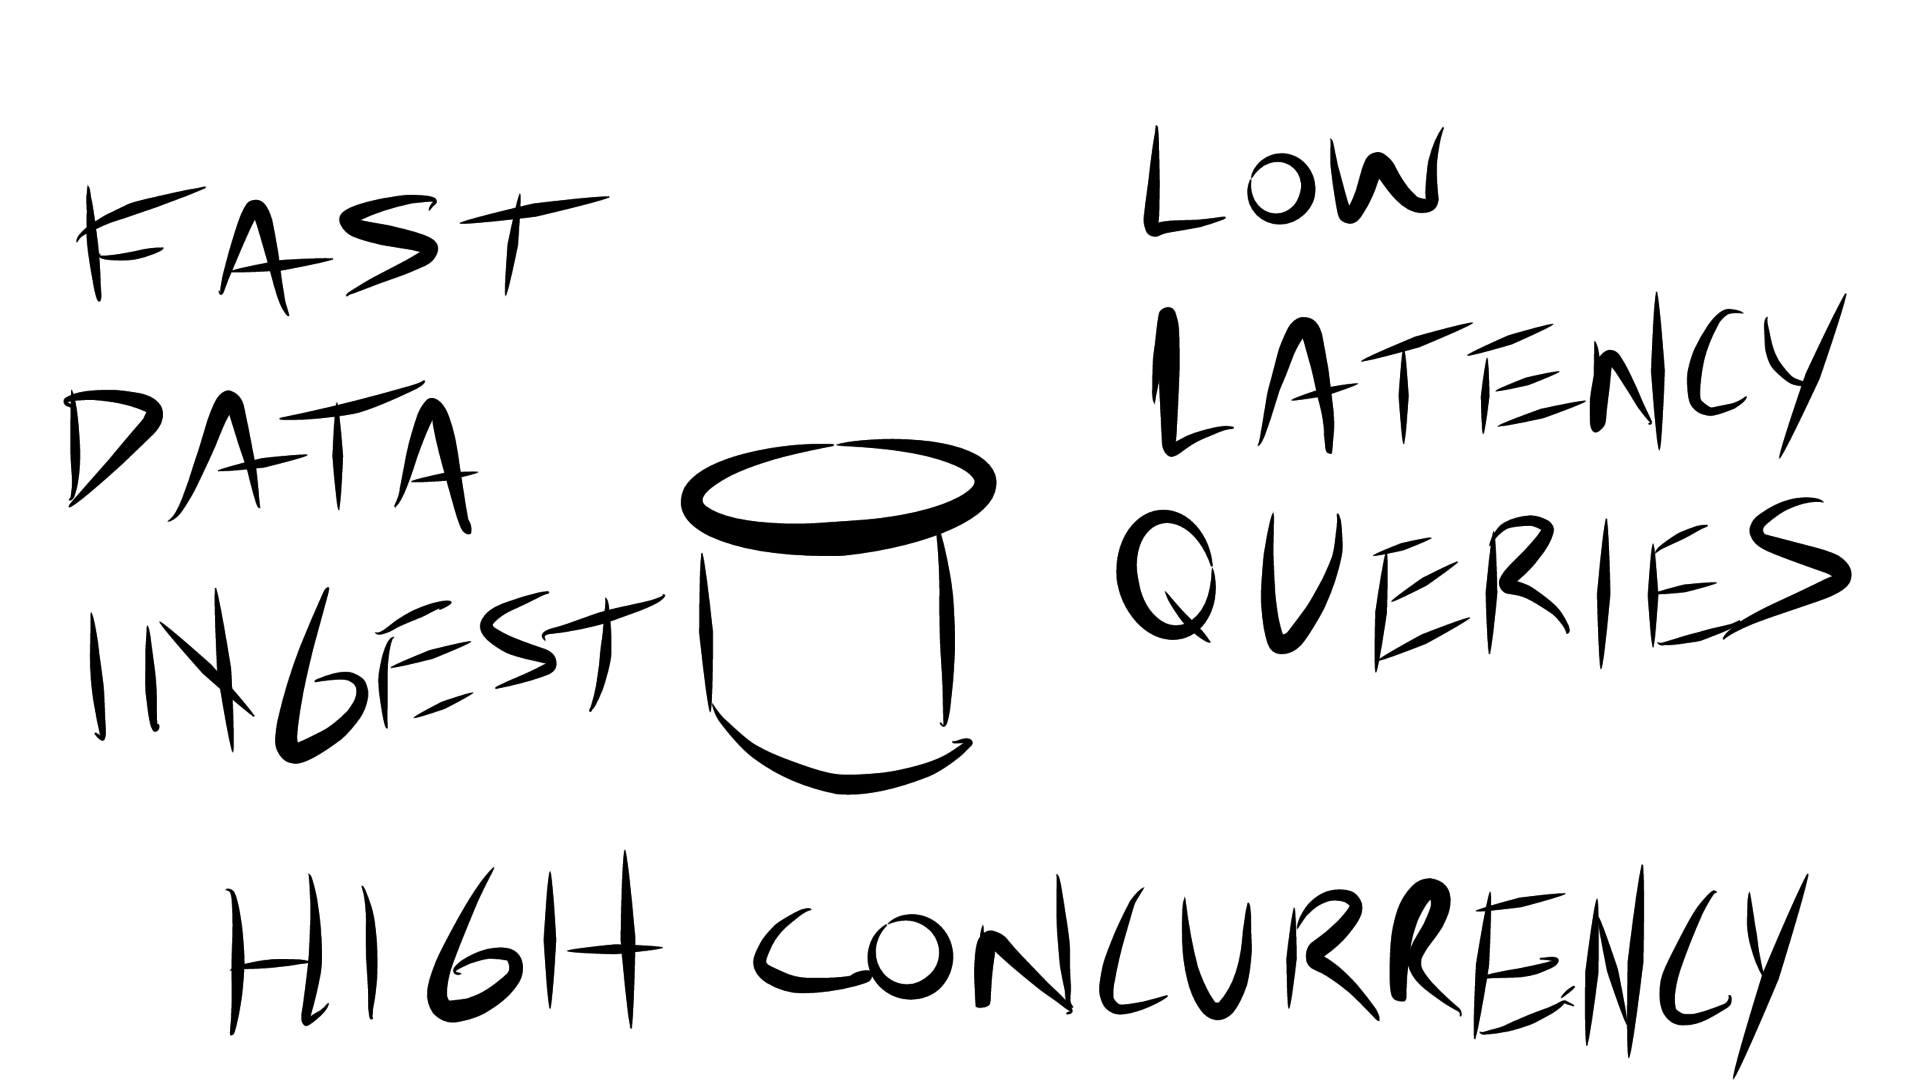 fast ingest low latency queries high concurrency